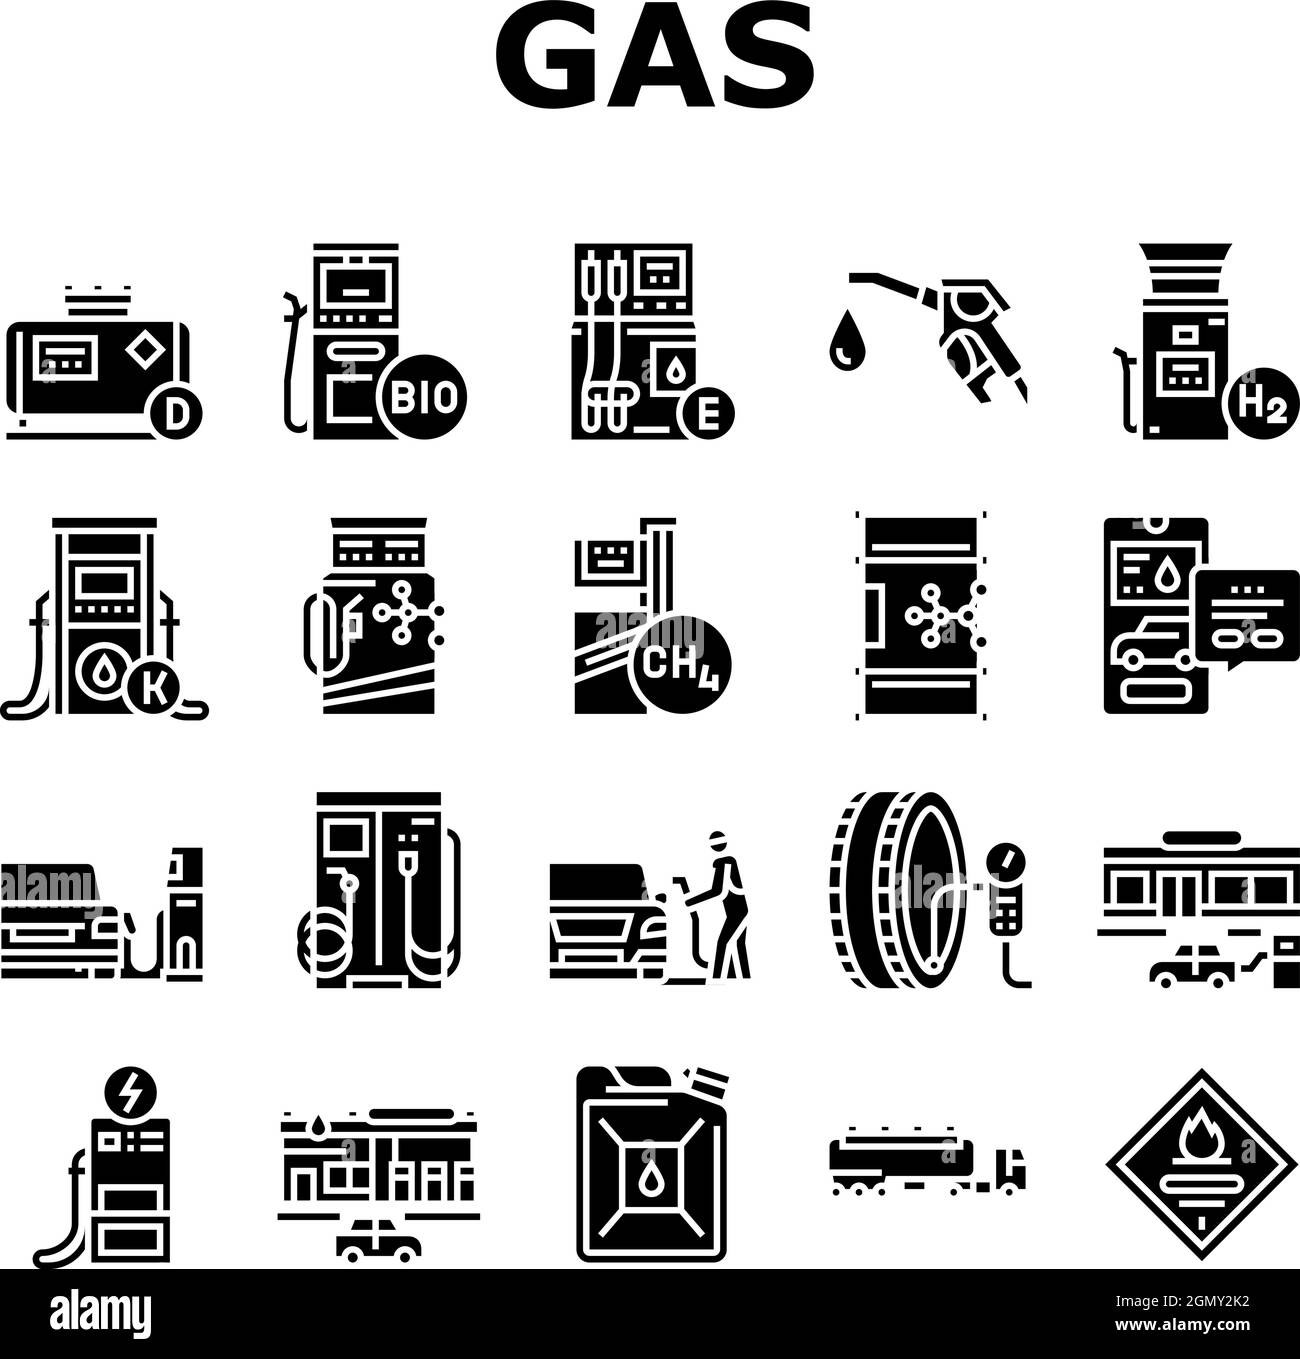 Gas Station Refueling Equipment Icons Set Vector Stock Vector